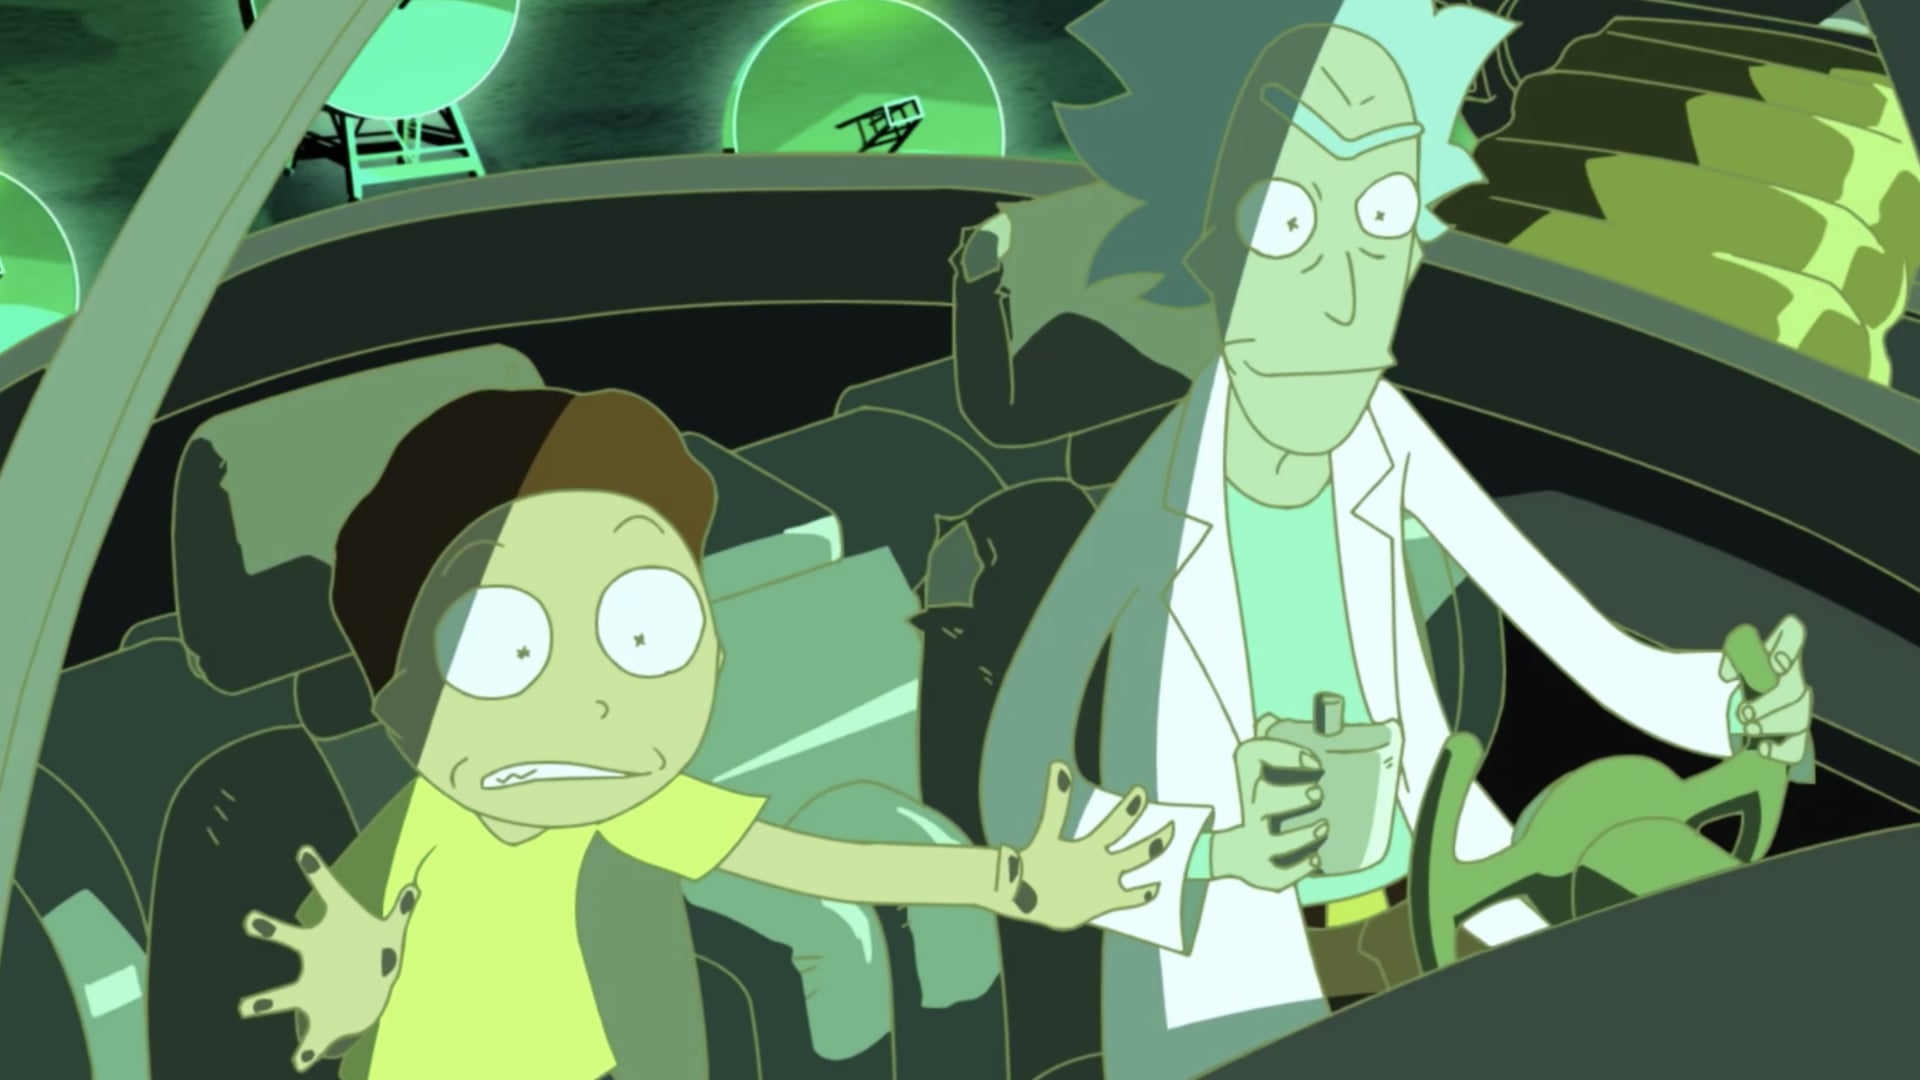 Rick and Morty Season 7 ‘Alternative Episodes’ Release Confirmed